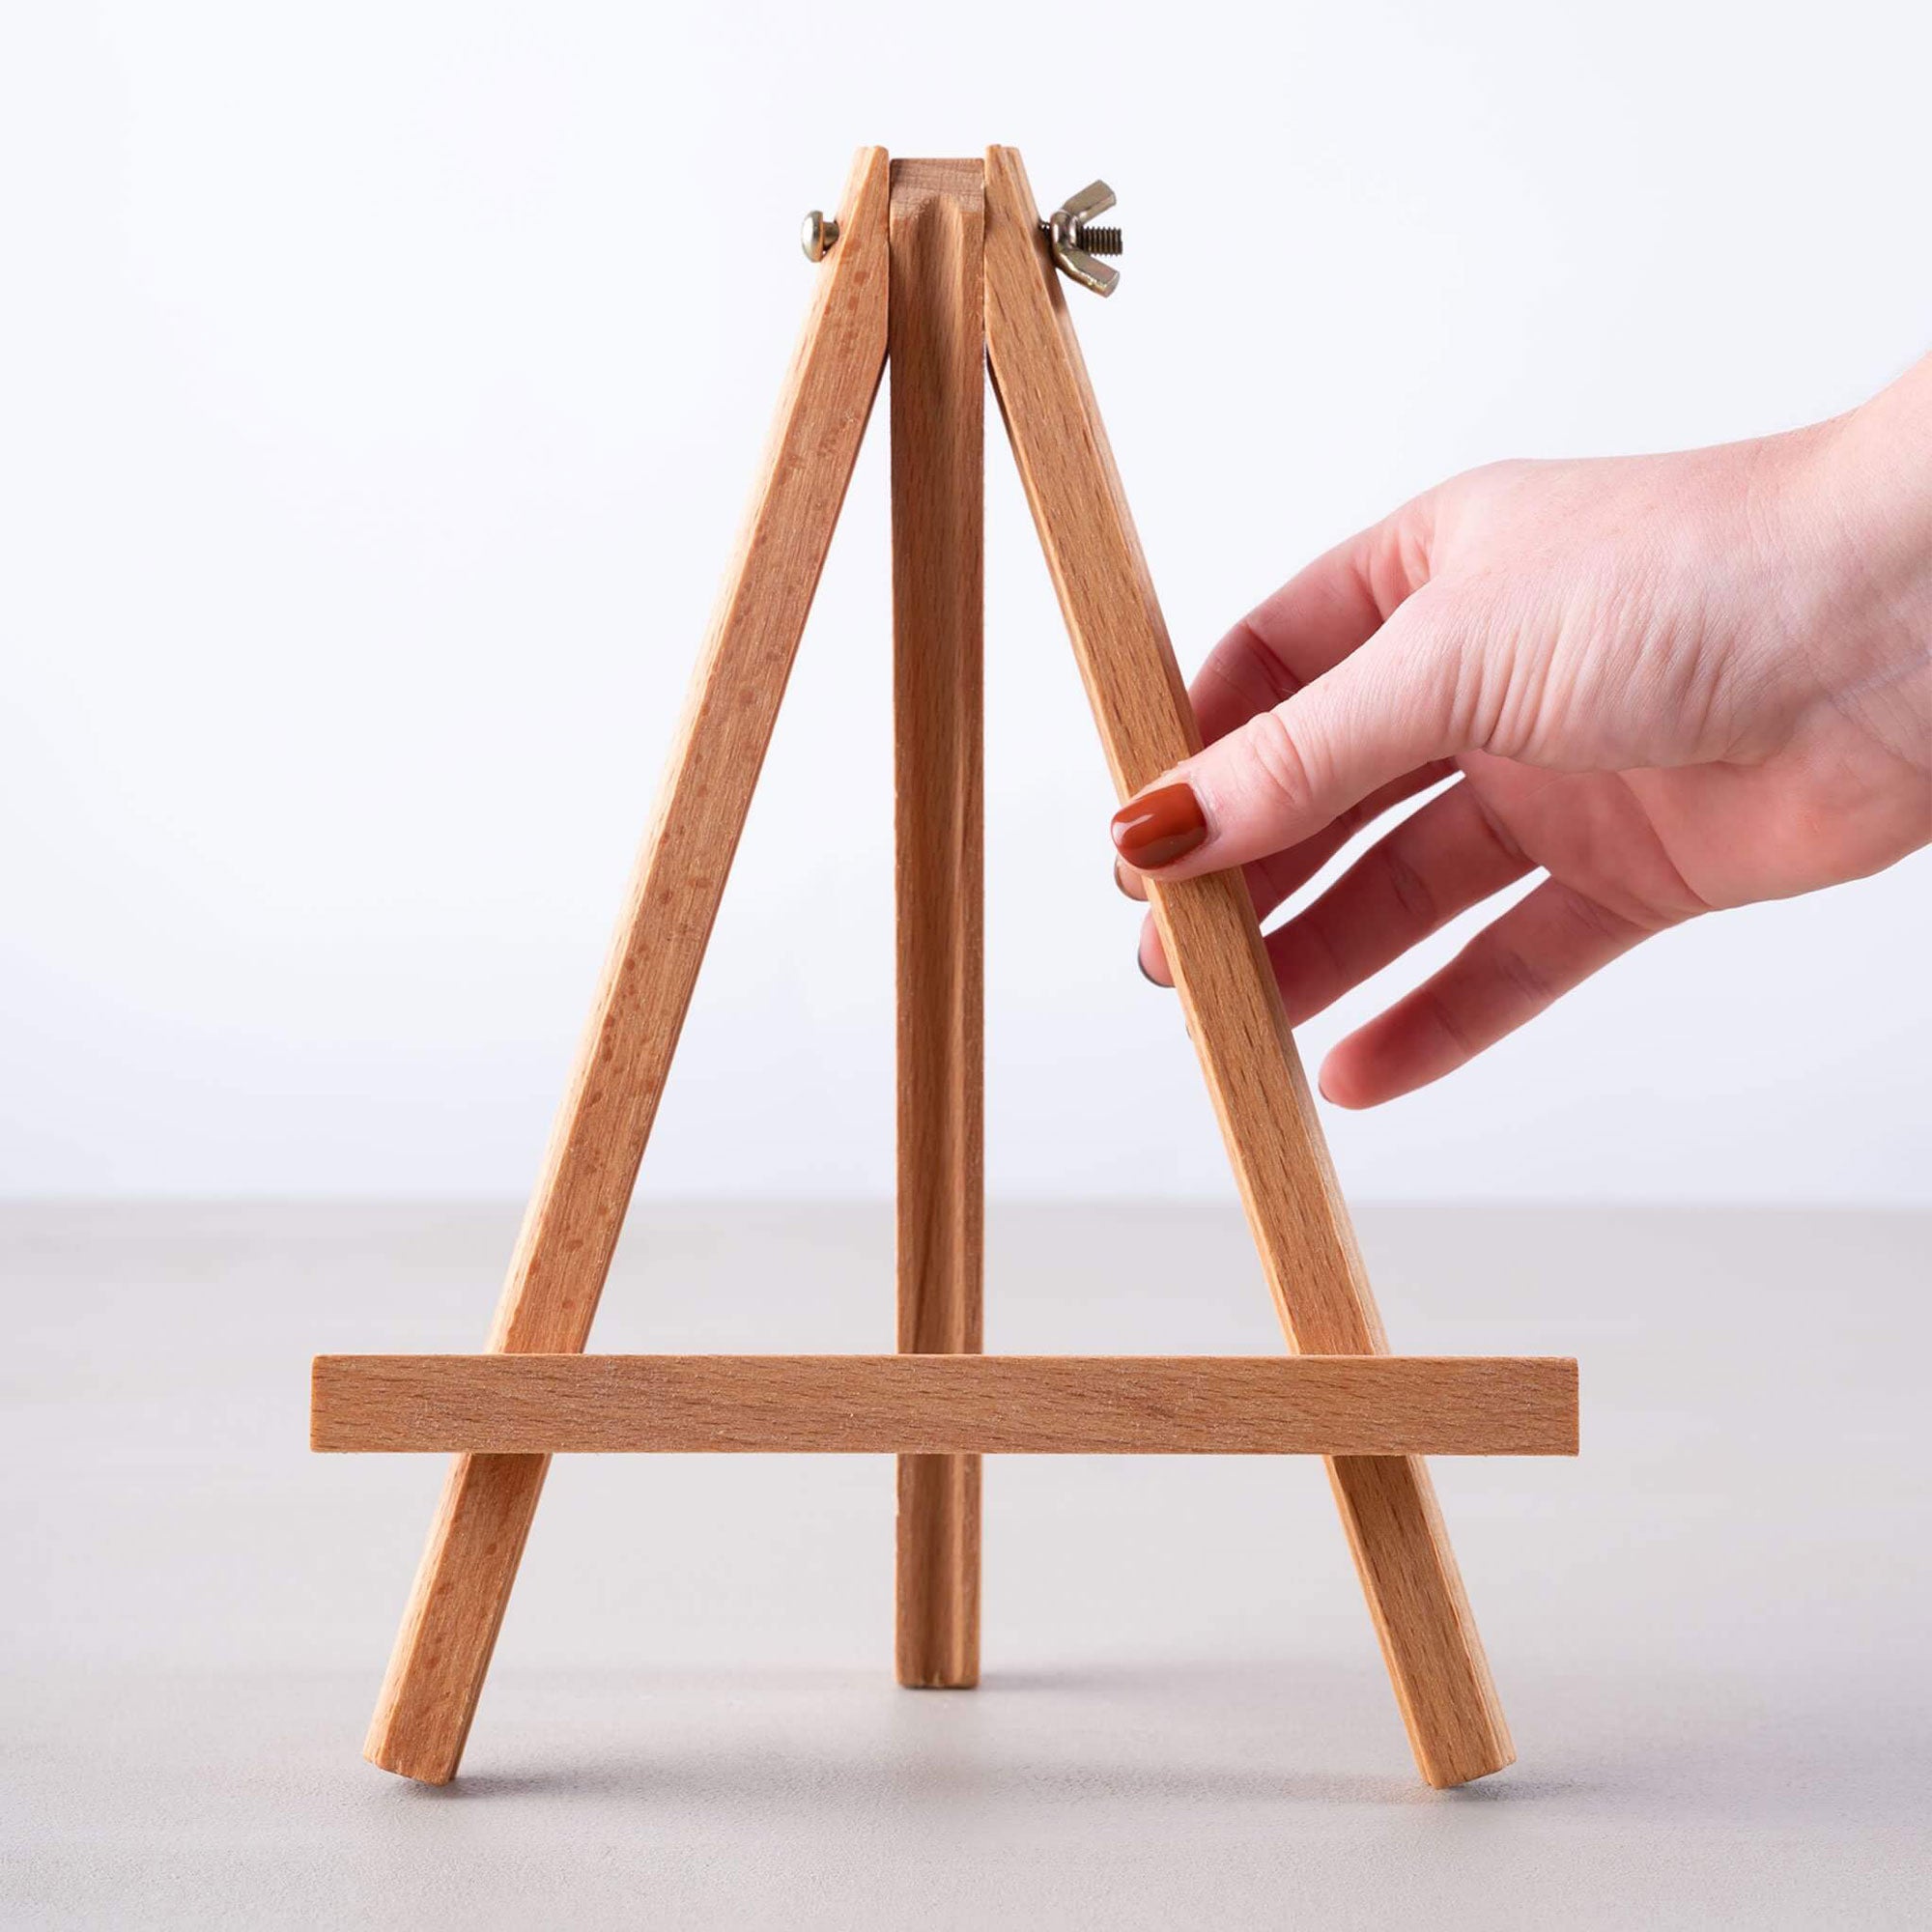 ARTdiscount DEAN Table/Display Easel with hand for scale